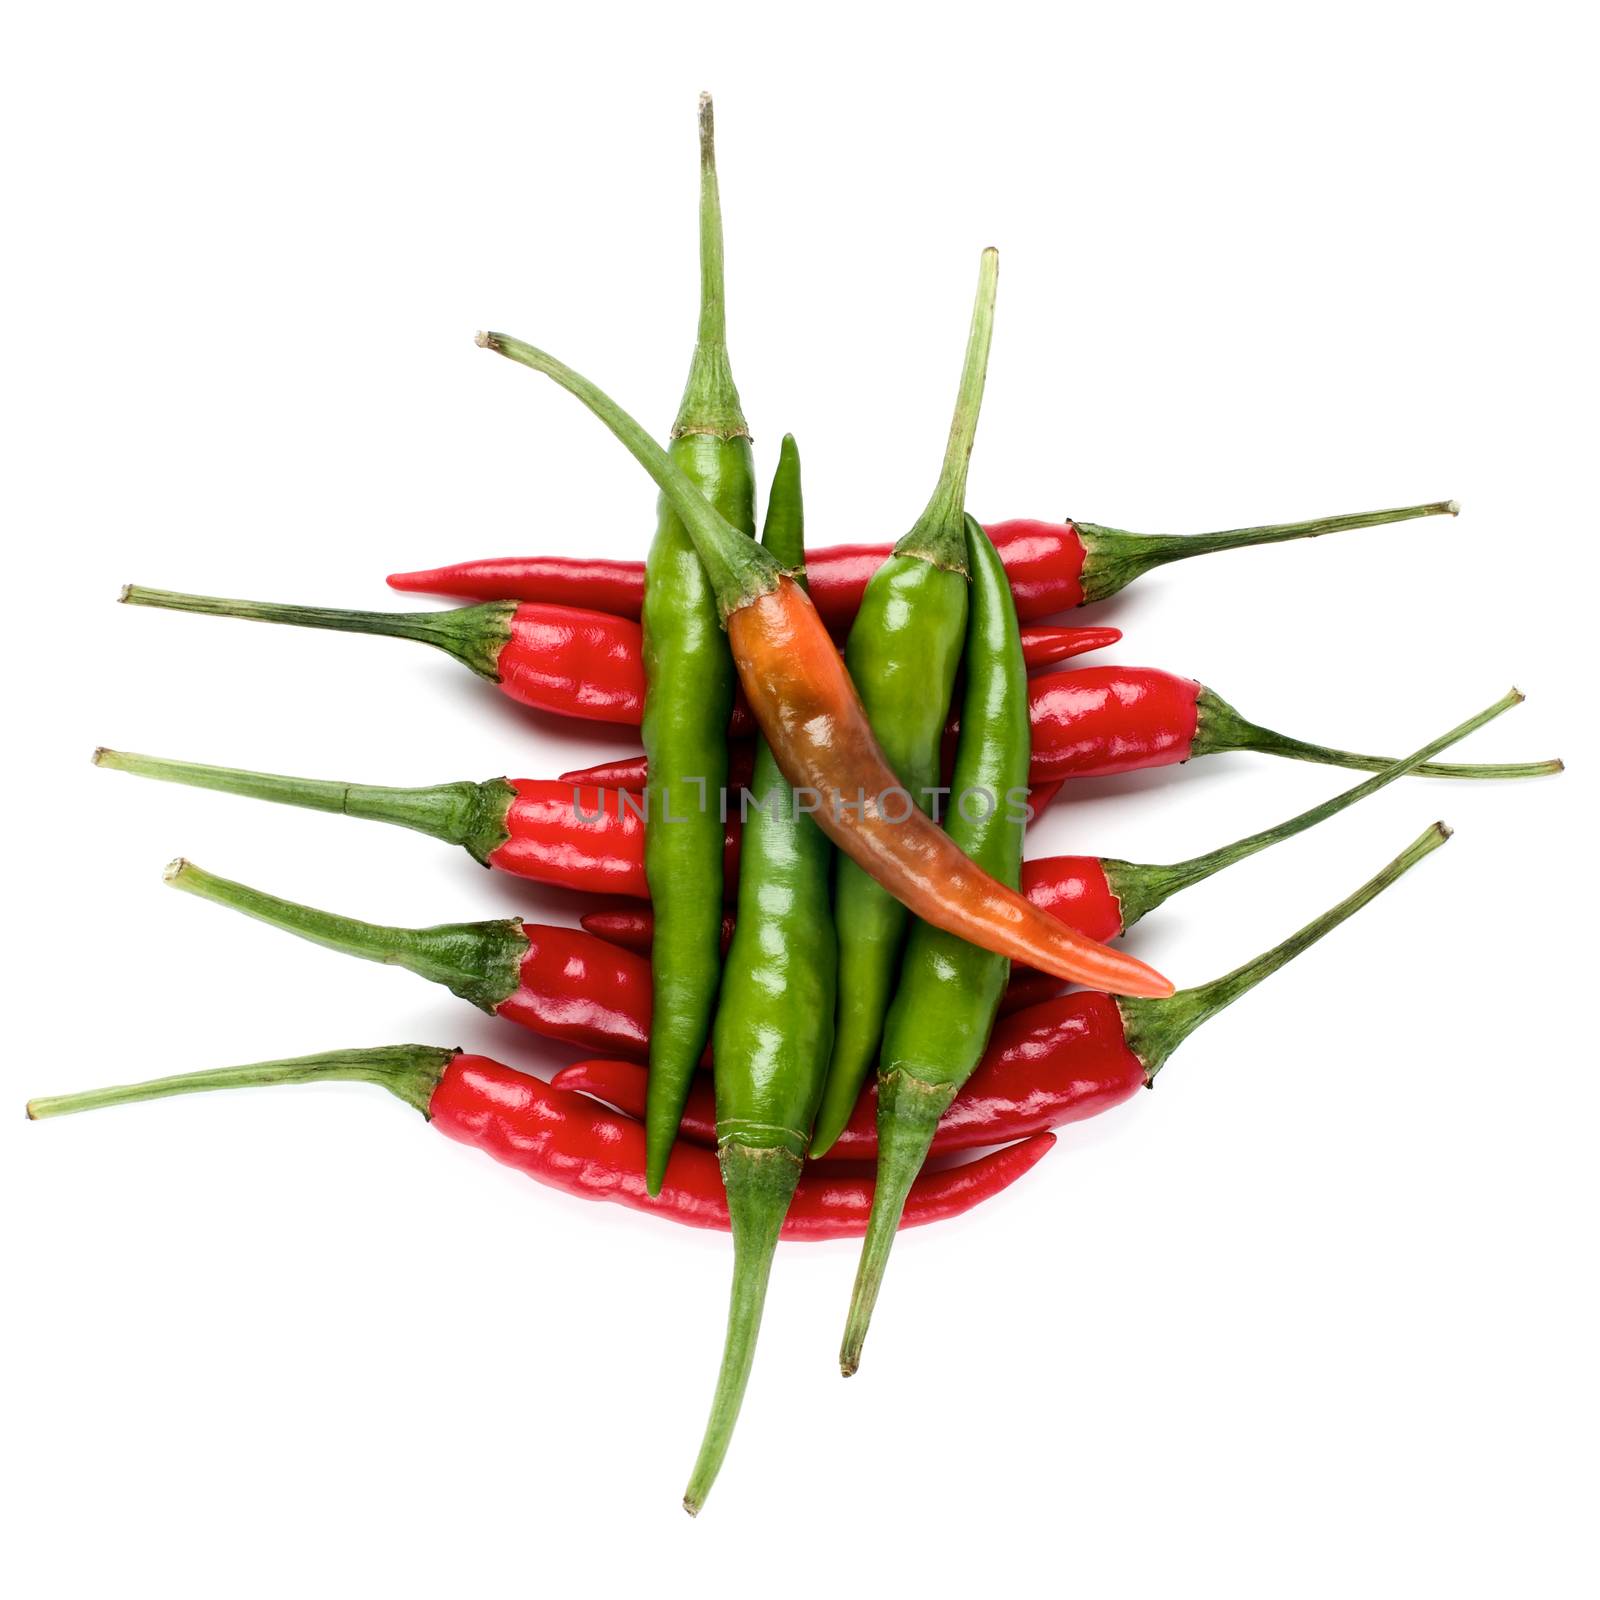 Arrangement of Perfect Red, Orange and Green Hot Chili Peppers closeup on White background